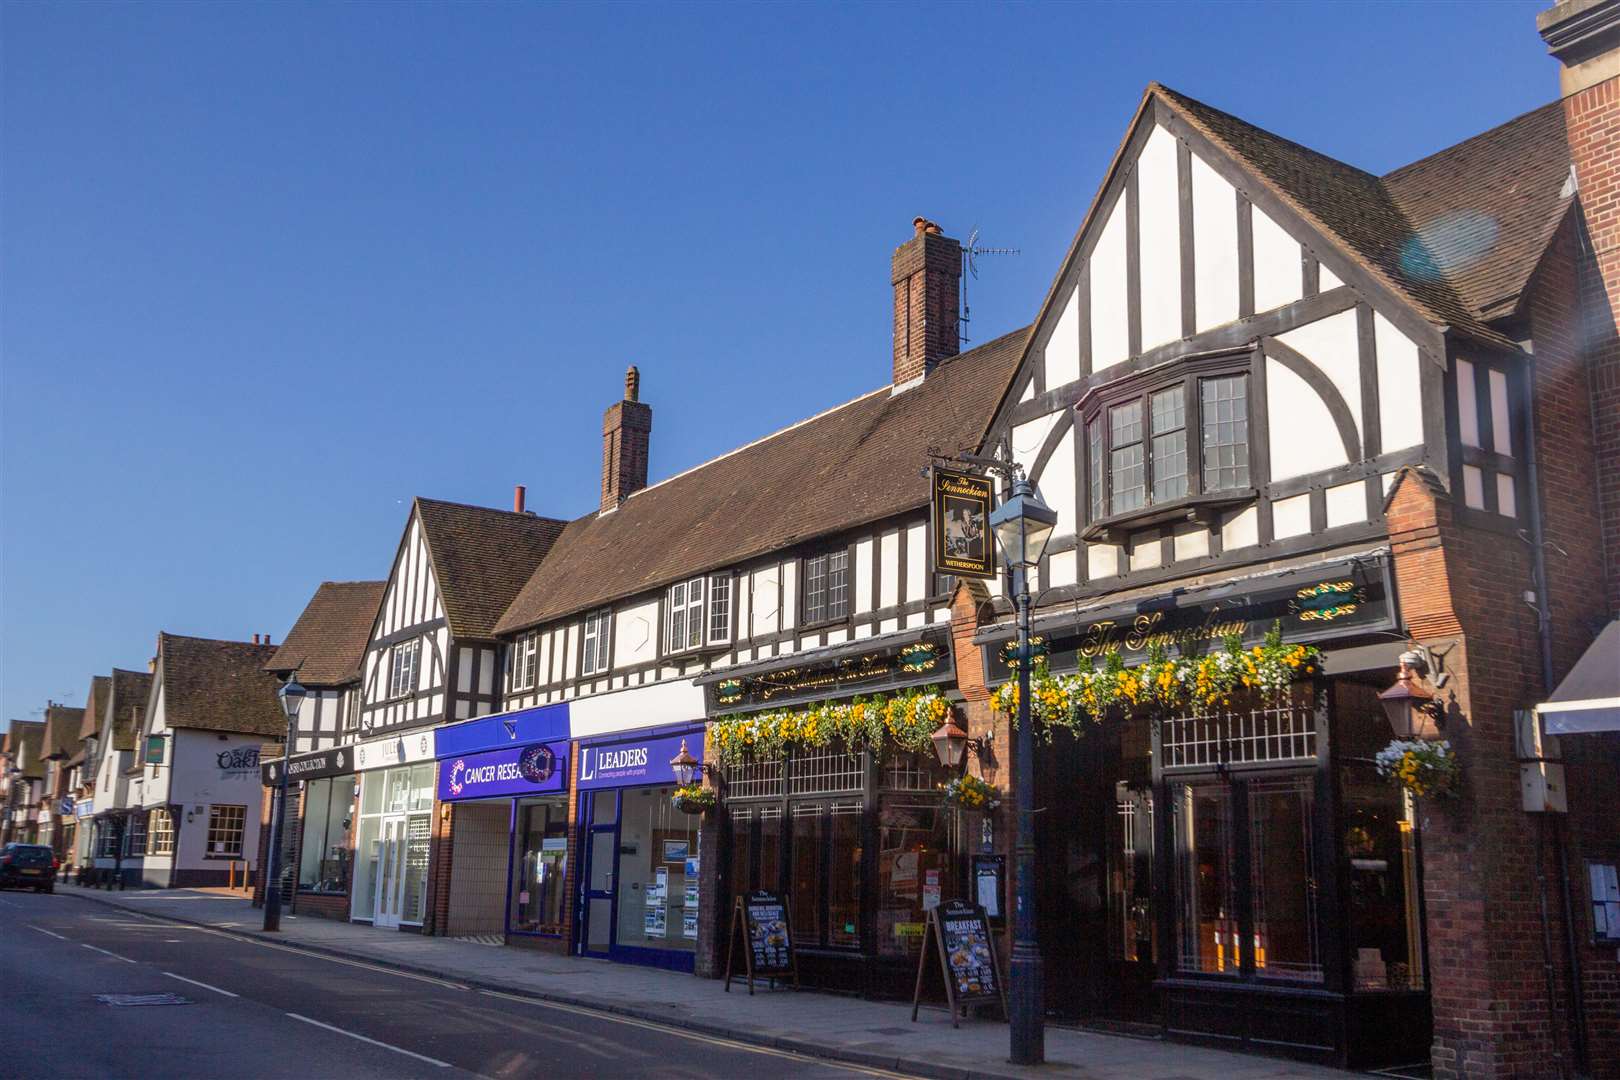 Shipwright has been at Wetherspoon's The Sennockian, in Sevenoaks, before launching his vicious attack